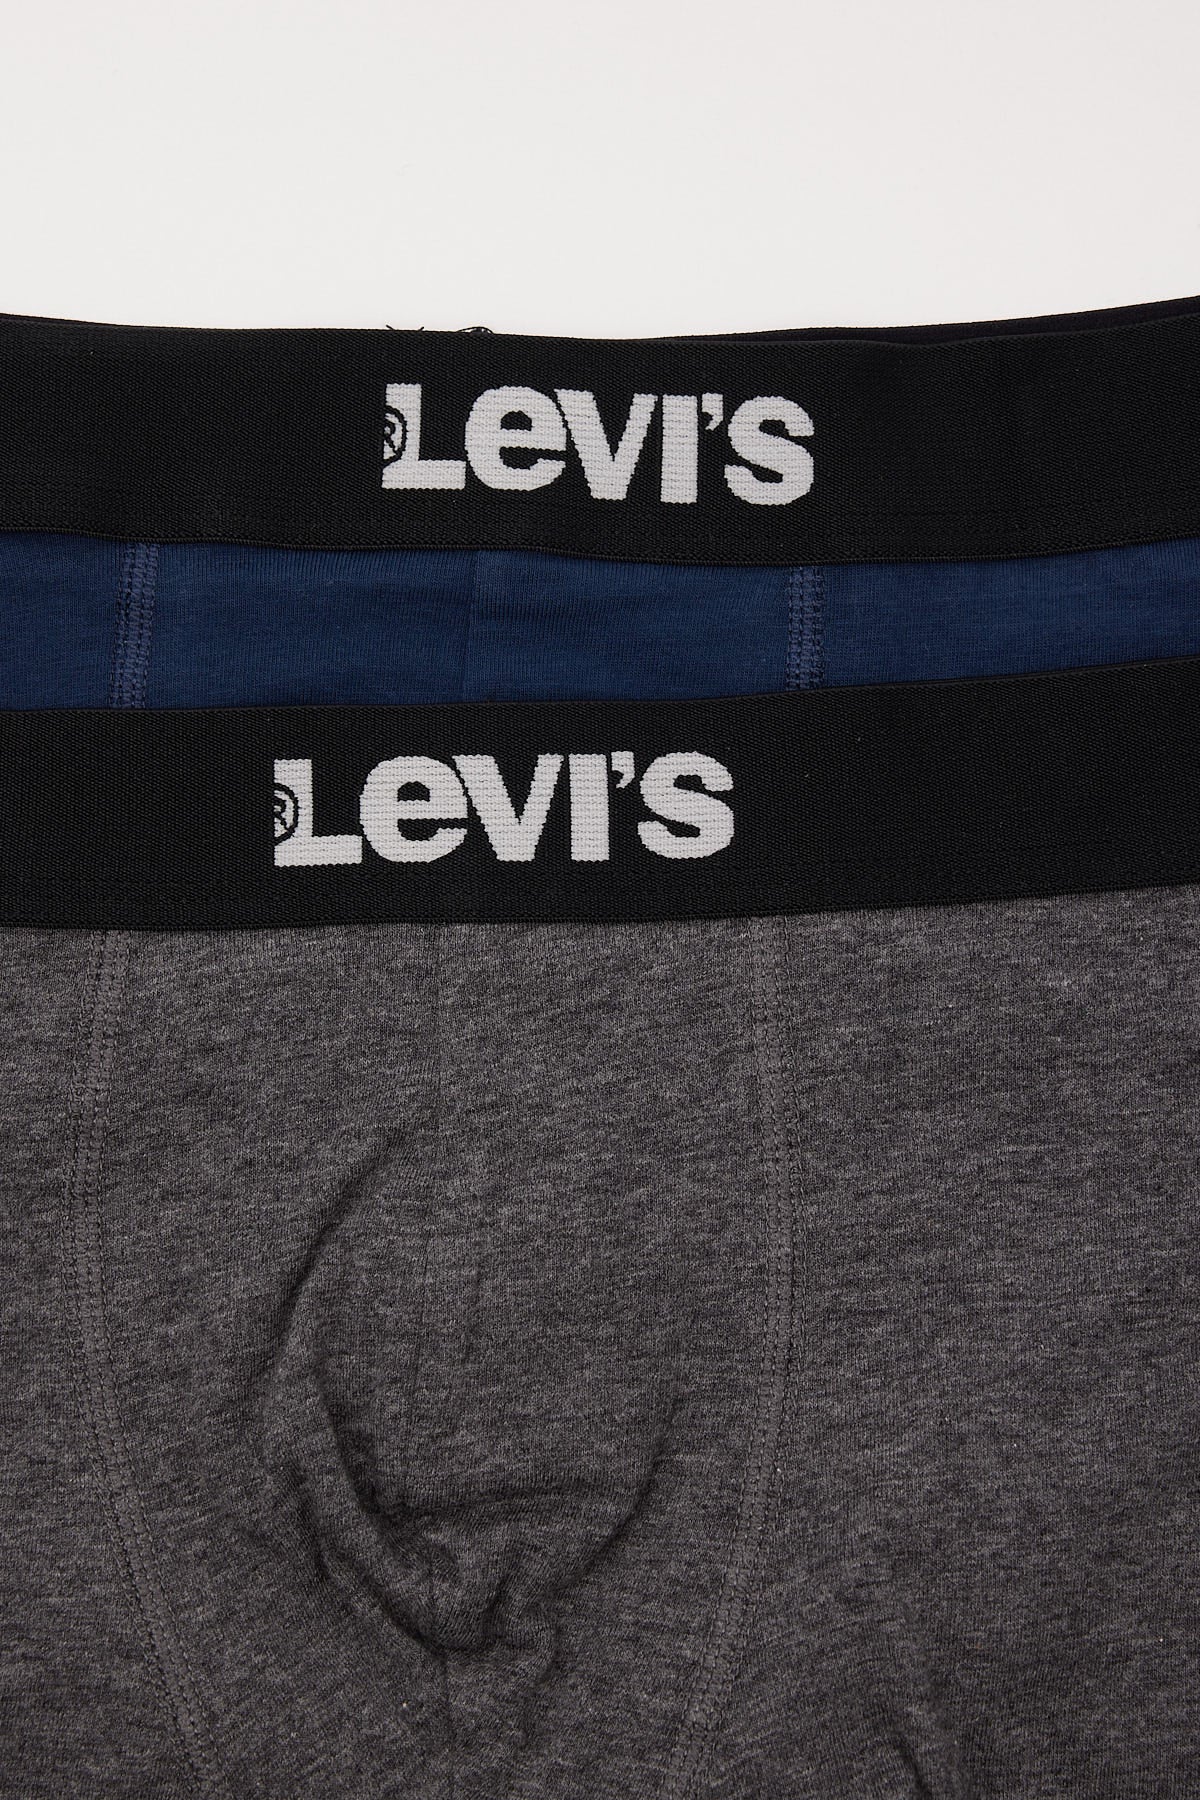 Levi's Solid Trunk 2 Pack Navy/Grey